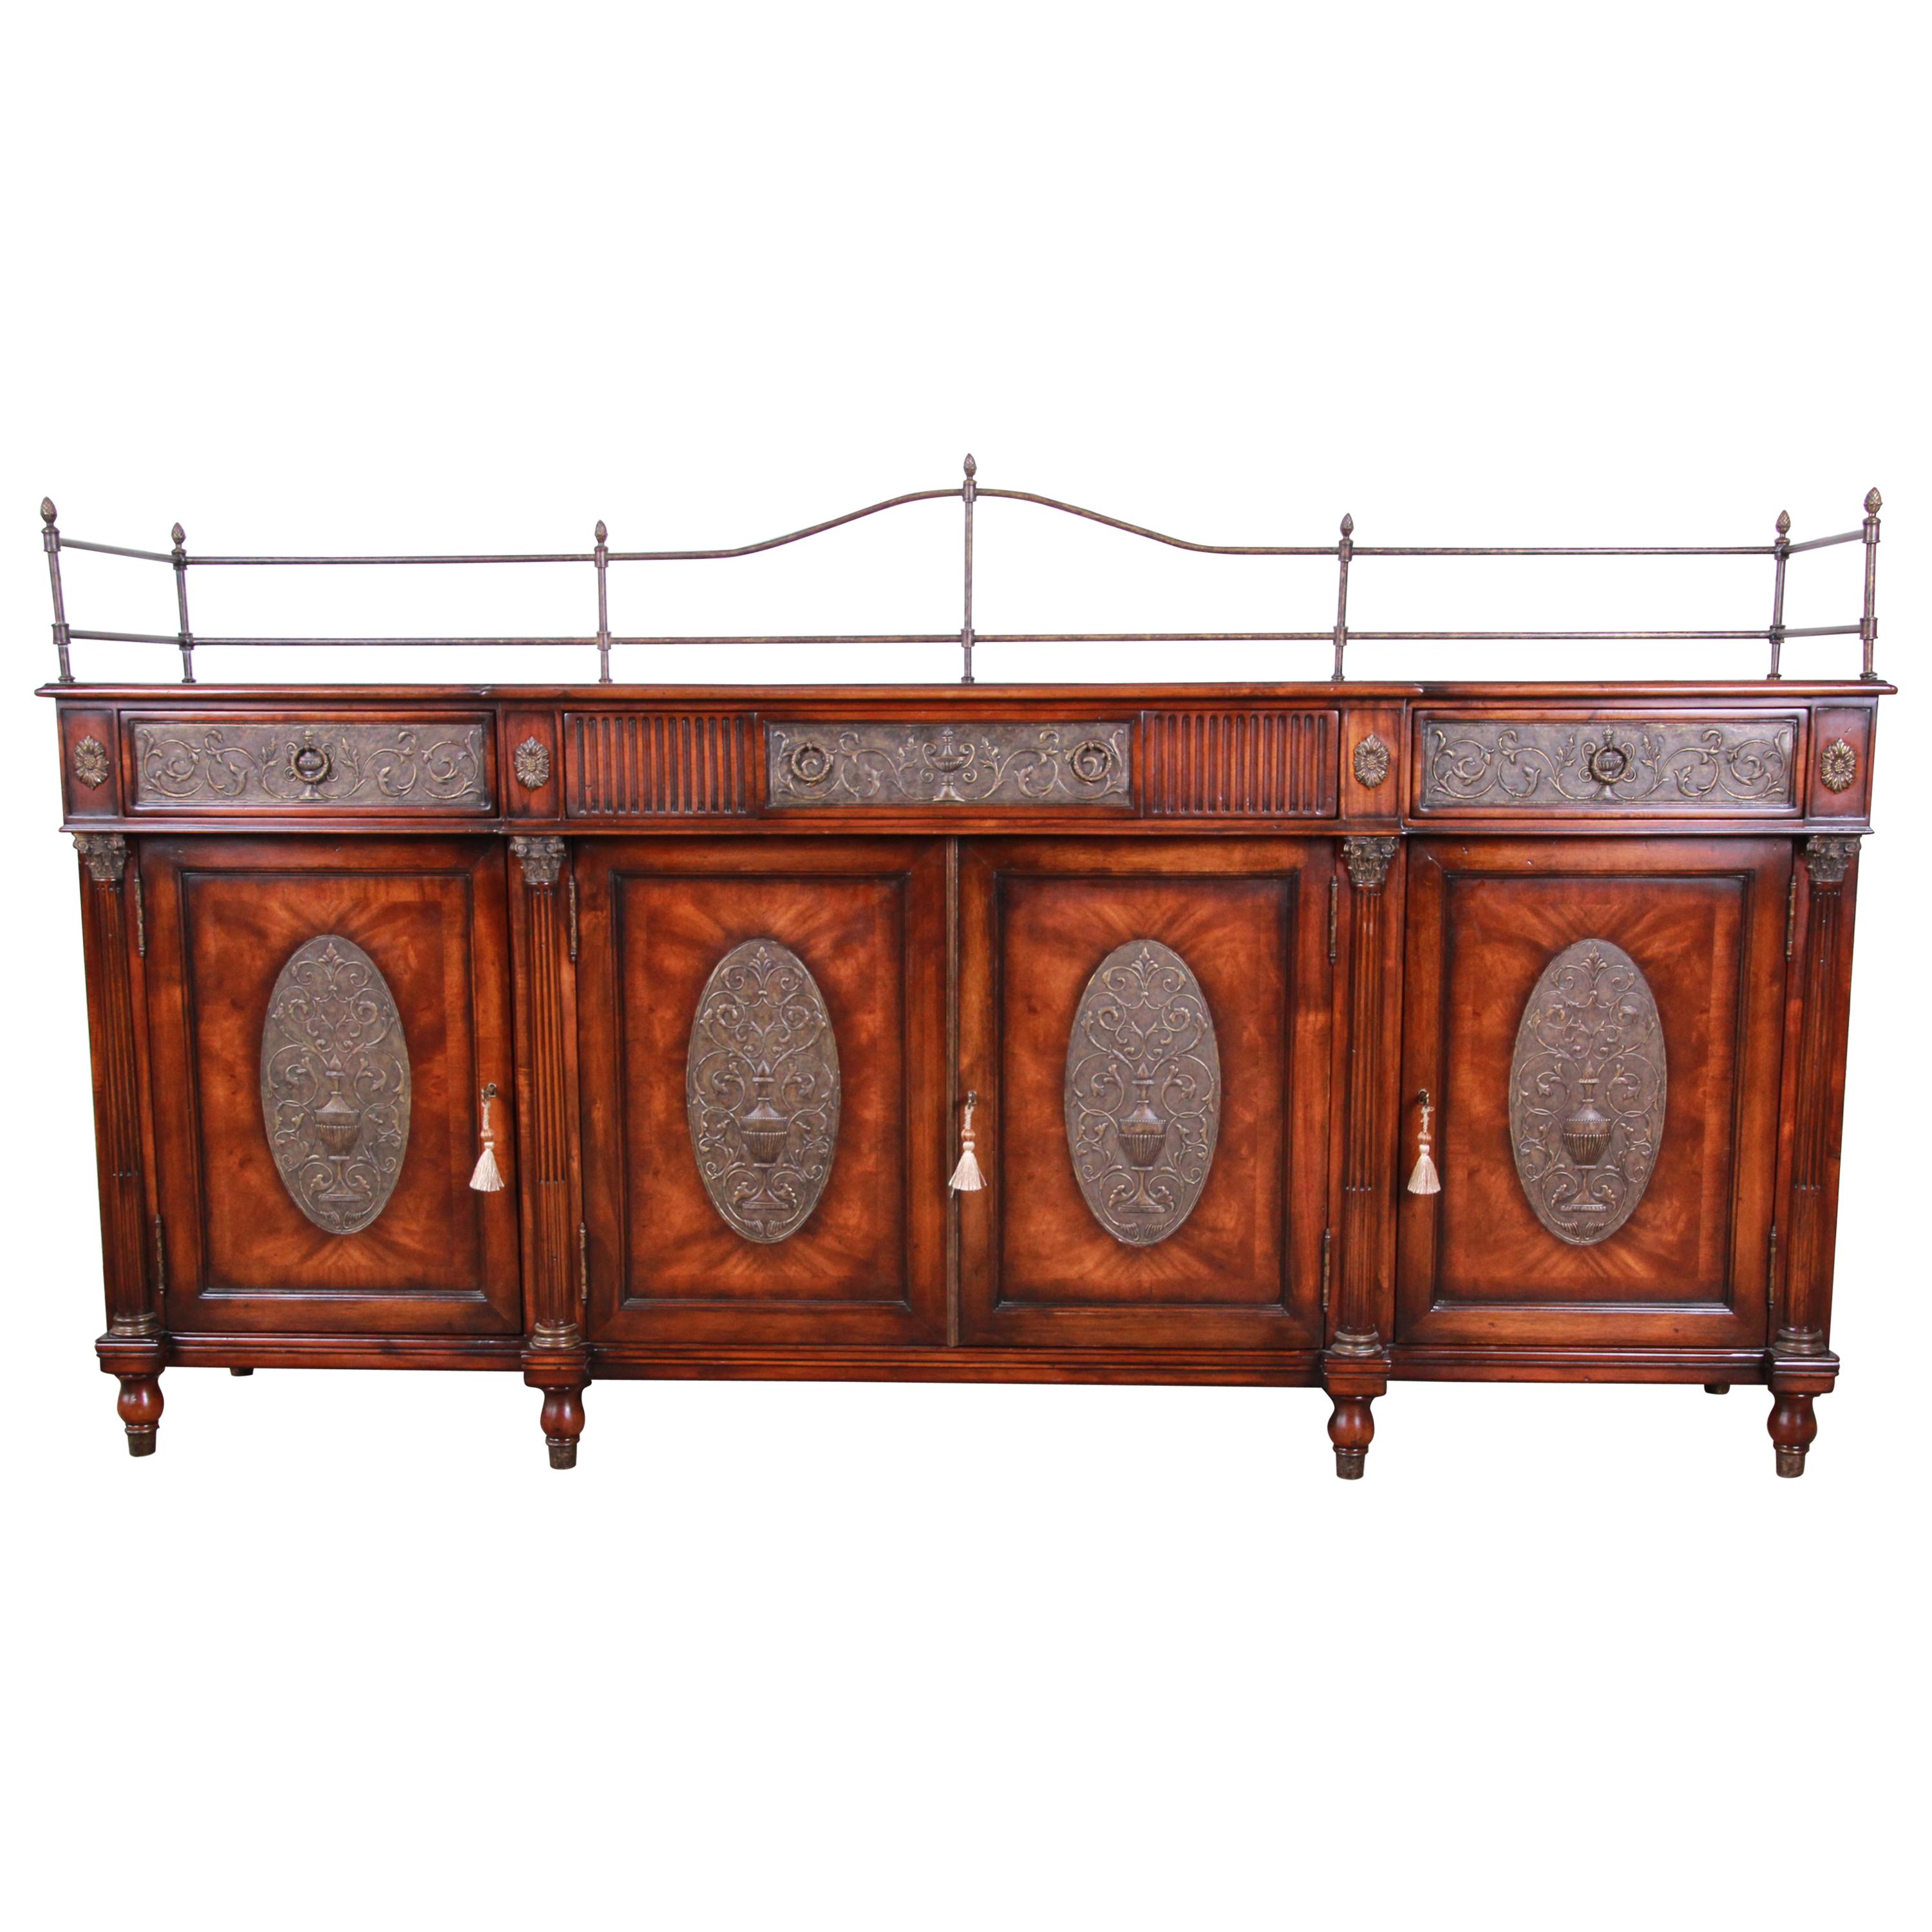 Theodore Alexander Regency Style Flame Mahogany Sideboard or Bar Cabinet